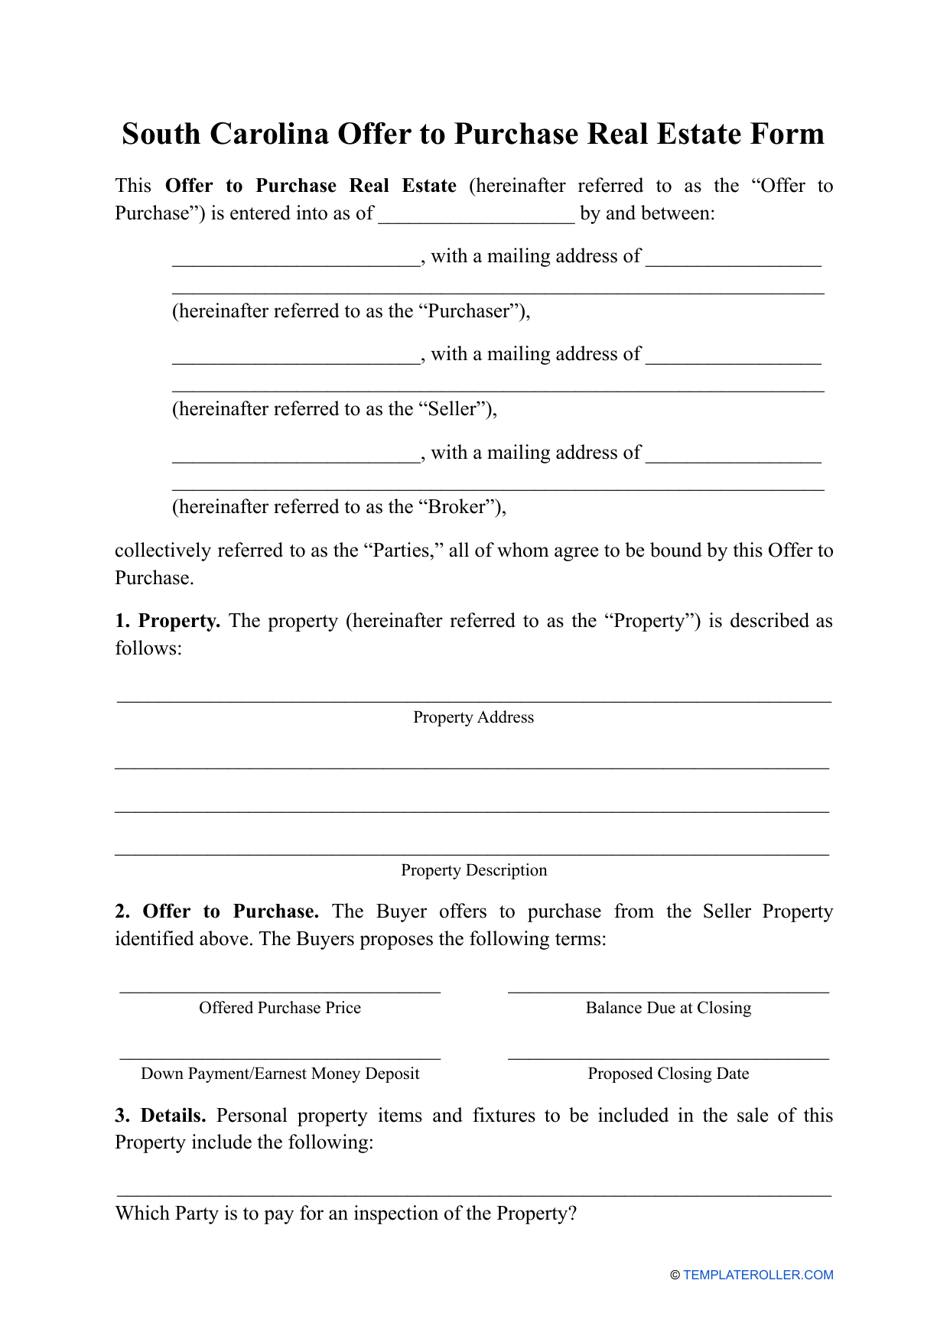 Offer to Purchase Real Estate Form - South Carolina, Page 1